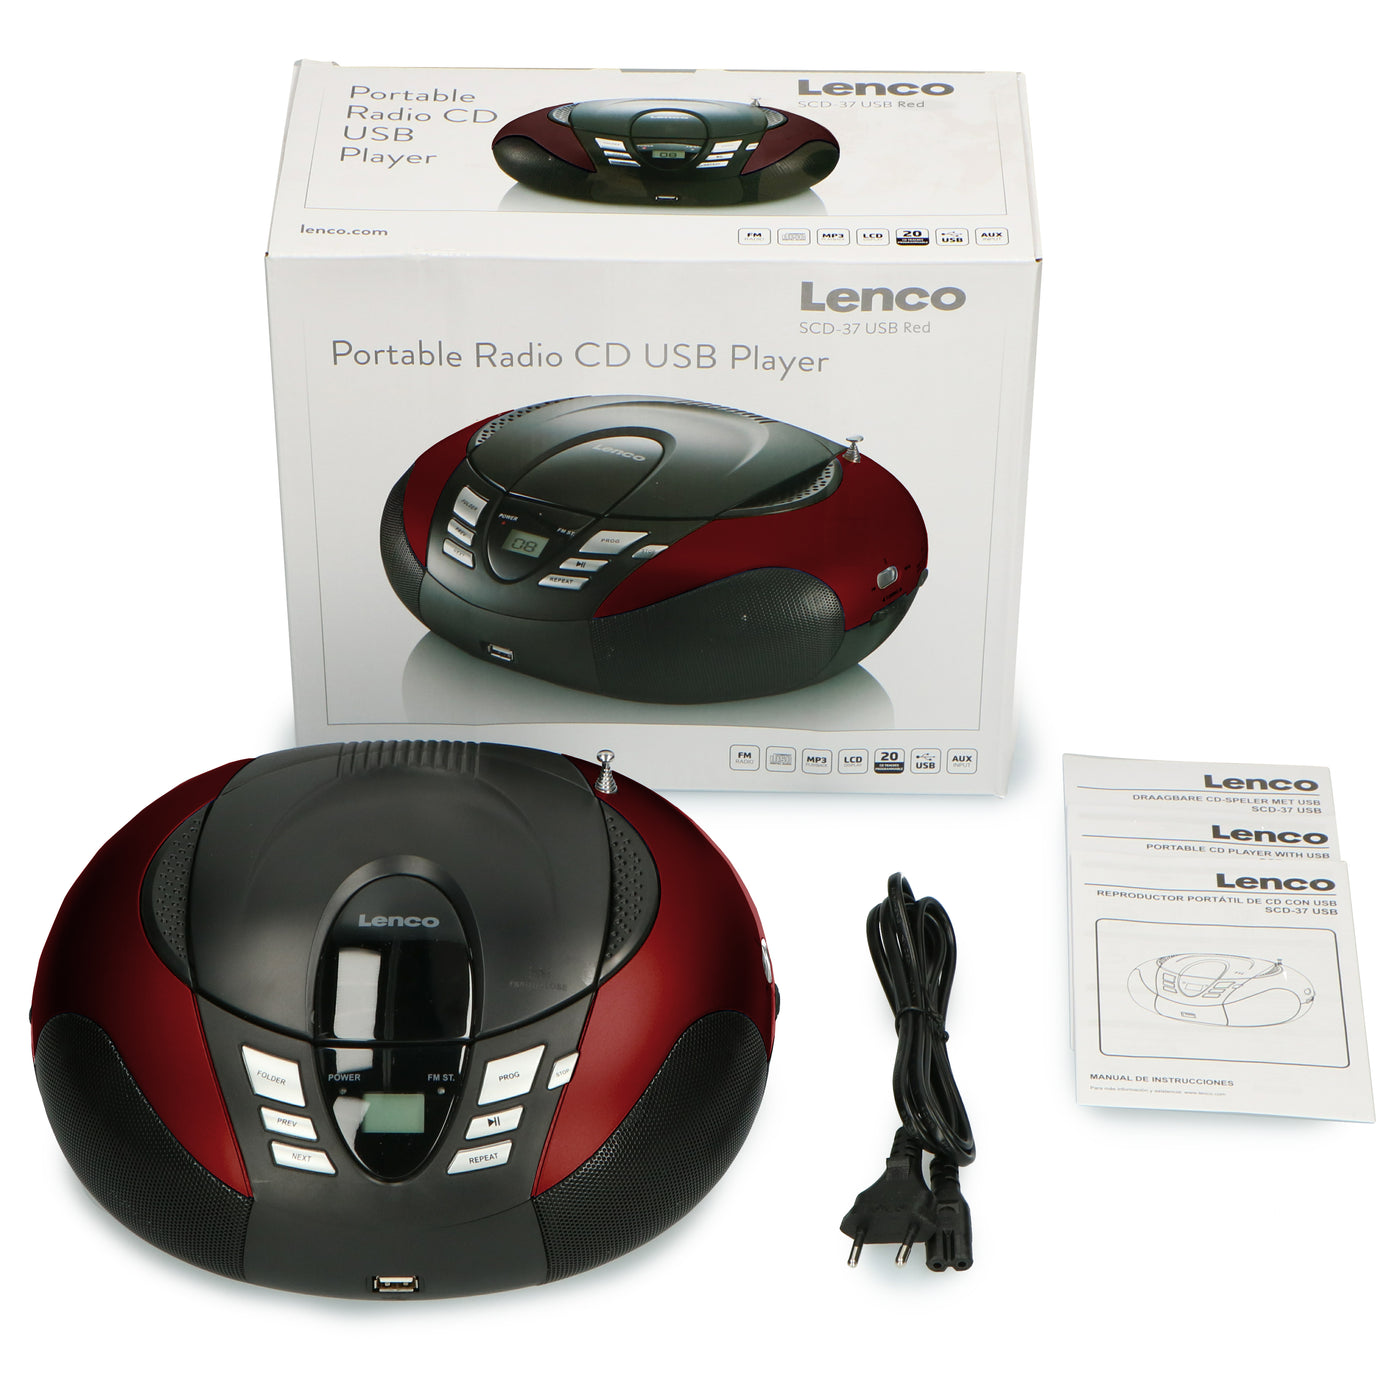 LENCO SCD-37 USB Red - Portable FM Radio CD and USB player - Red